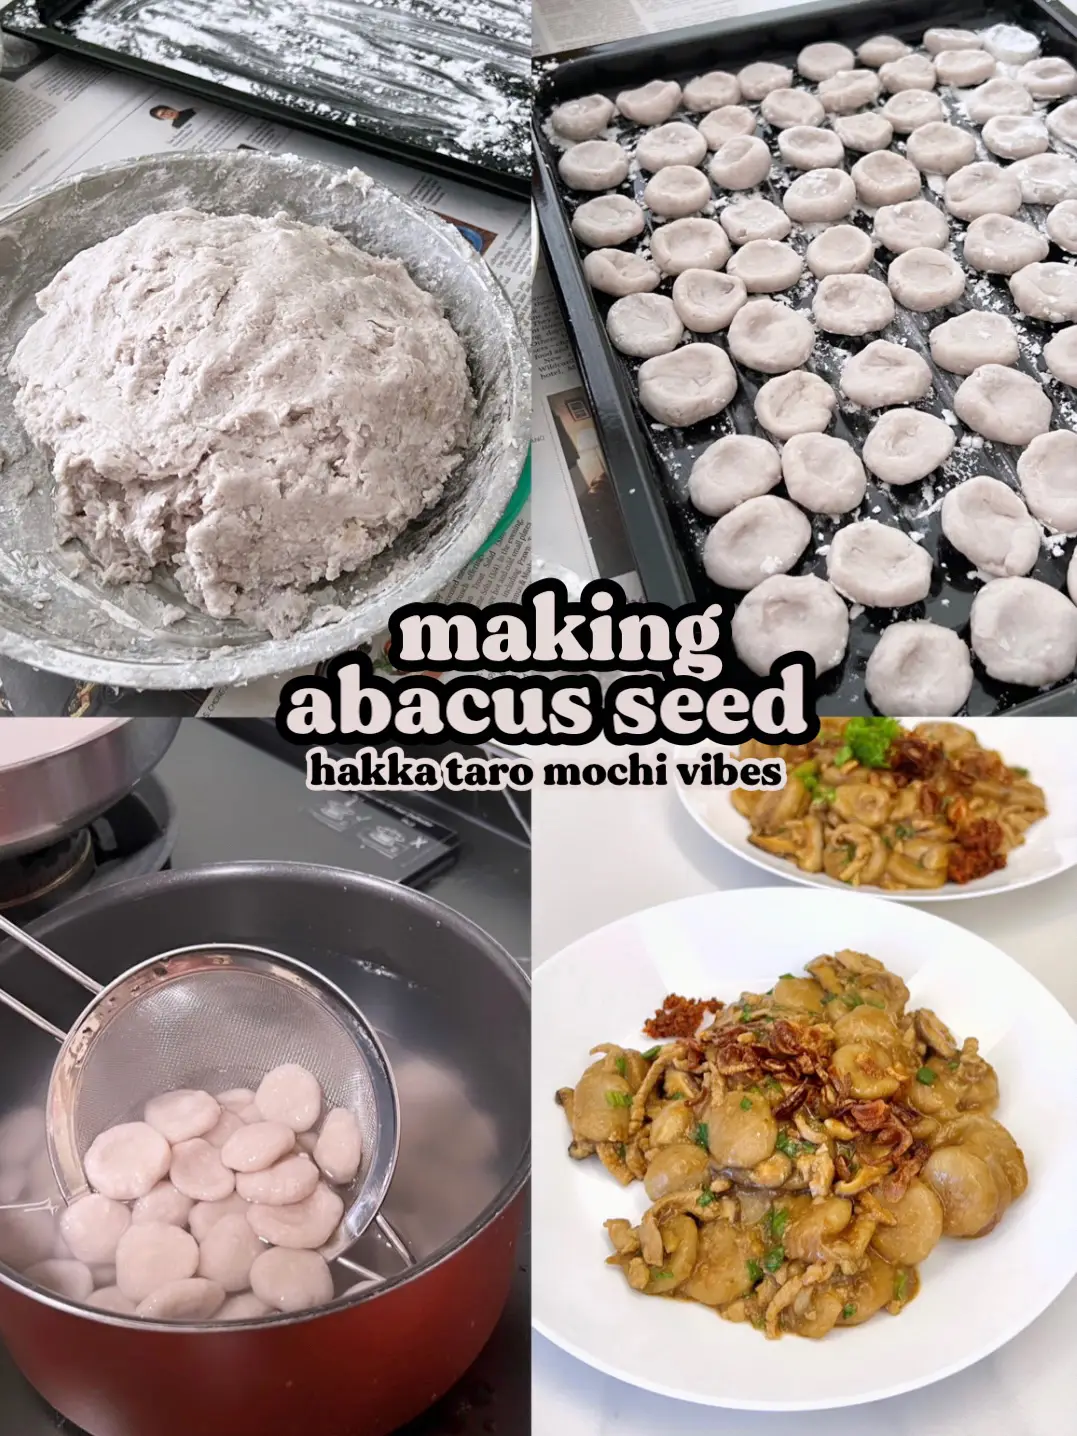 homemade abacus seeds from scratch | w recipe 🤍's images(0)